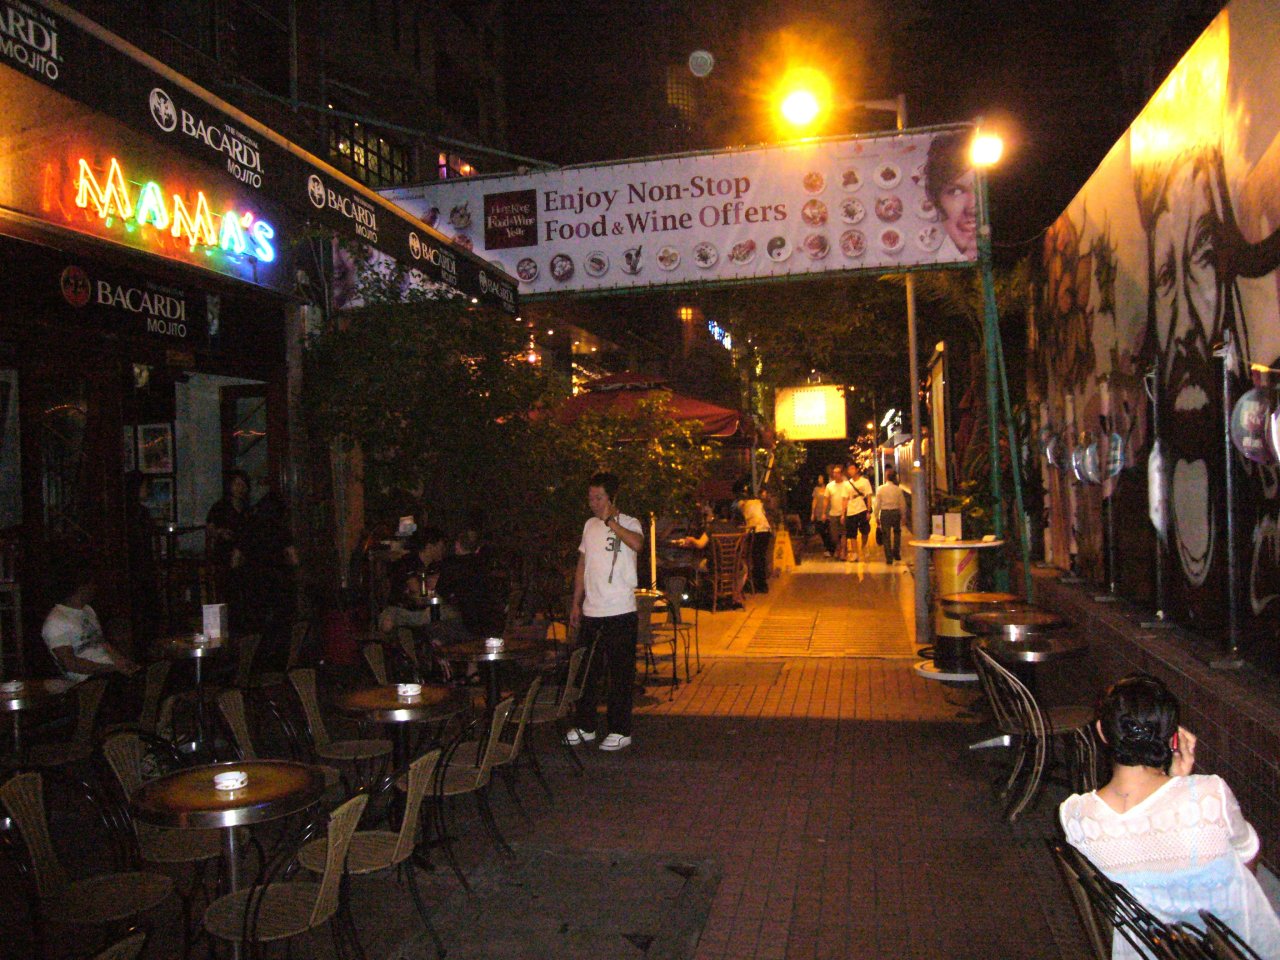 JPEG image - Knutsford Terraces, Kowloon. We ate twice at 